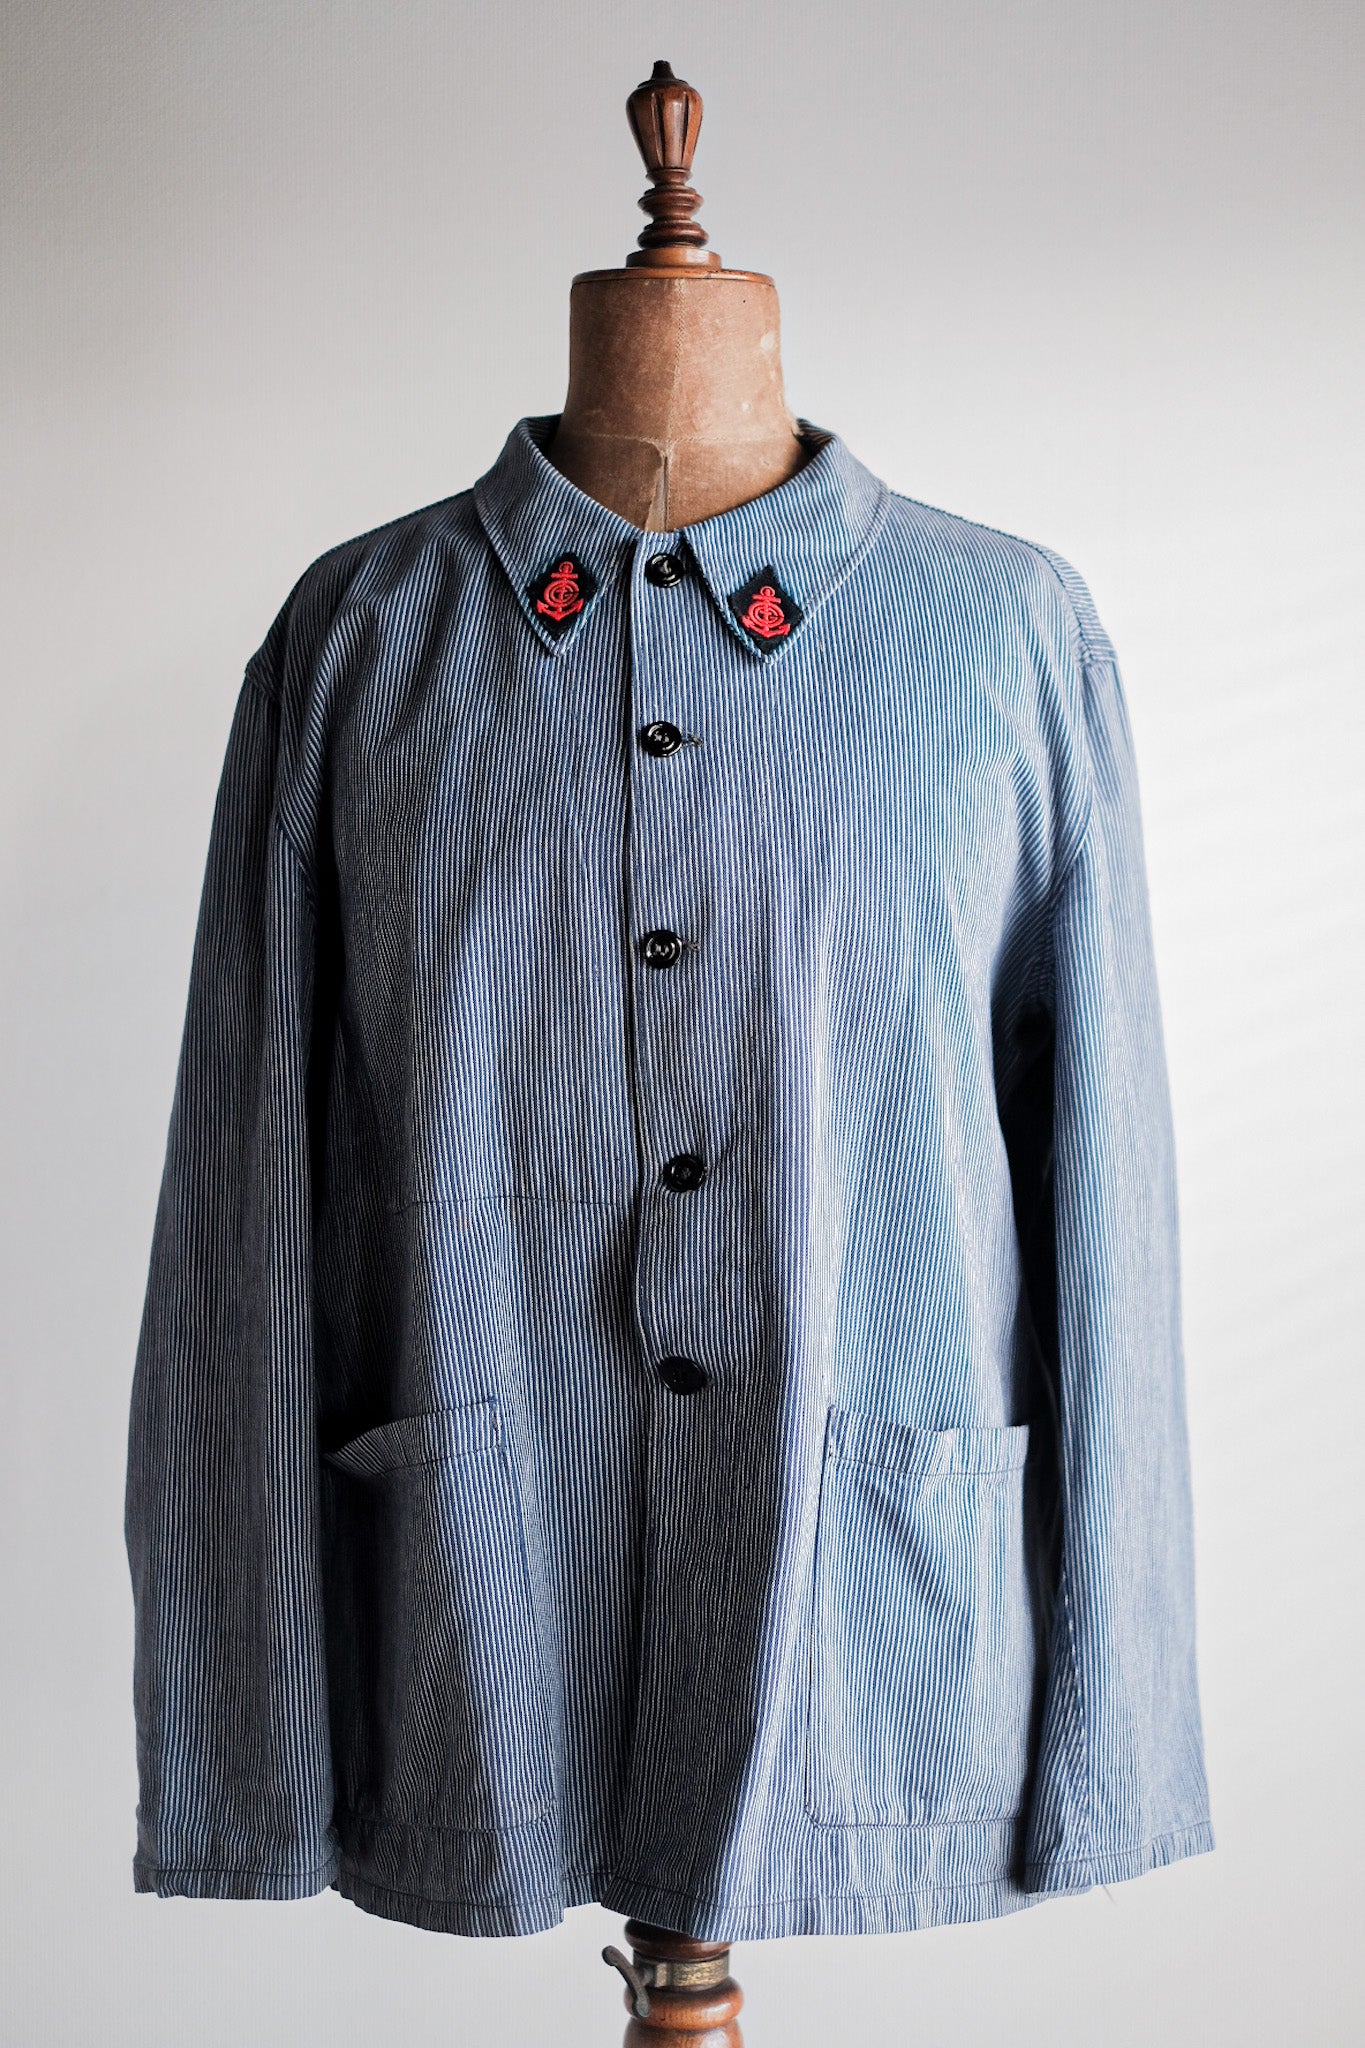 [~ 50's] French Vintage Cotton Striped Work Jacket "CGT"